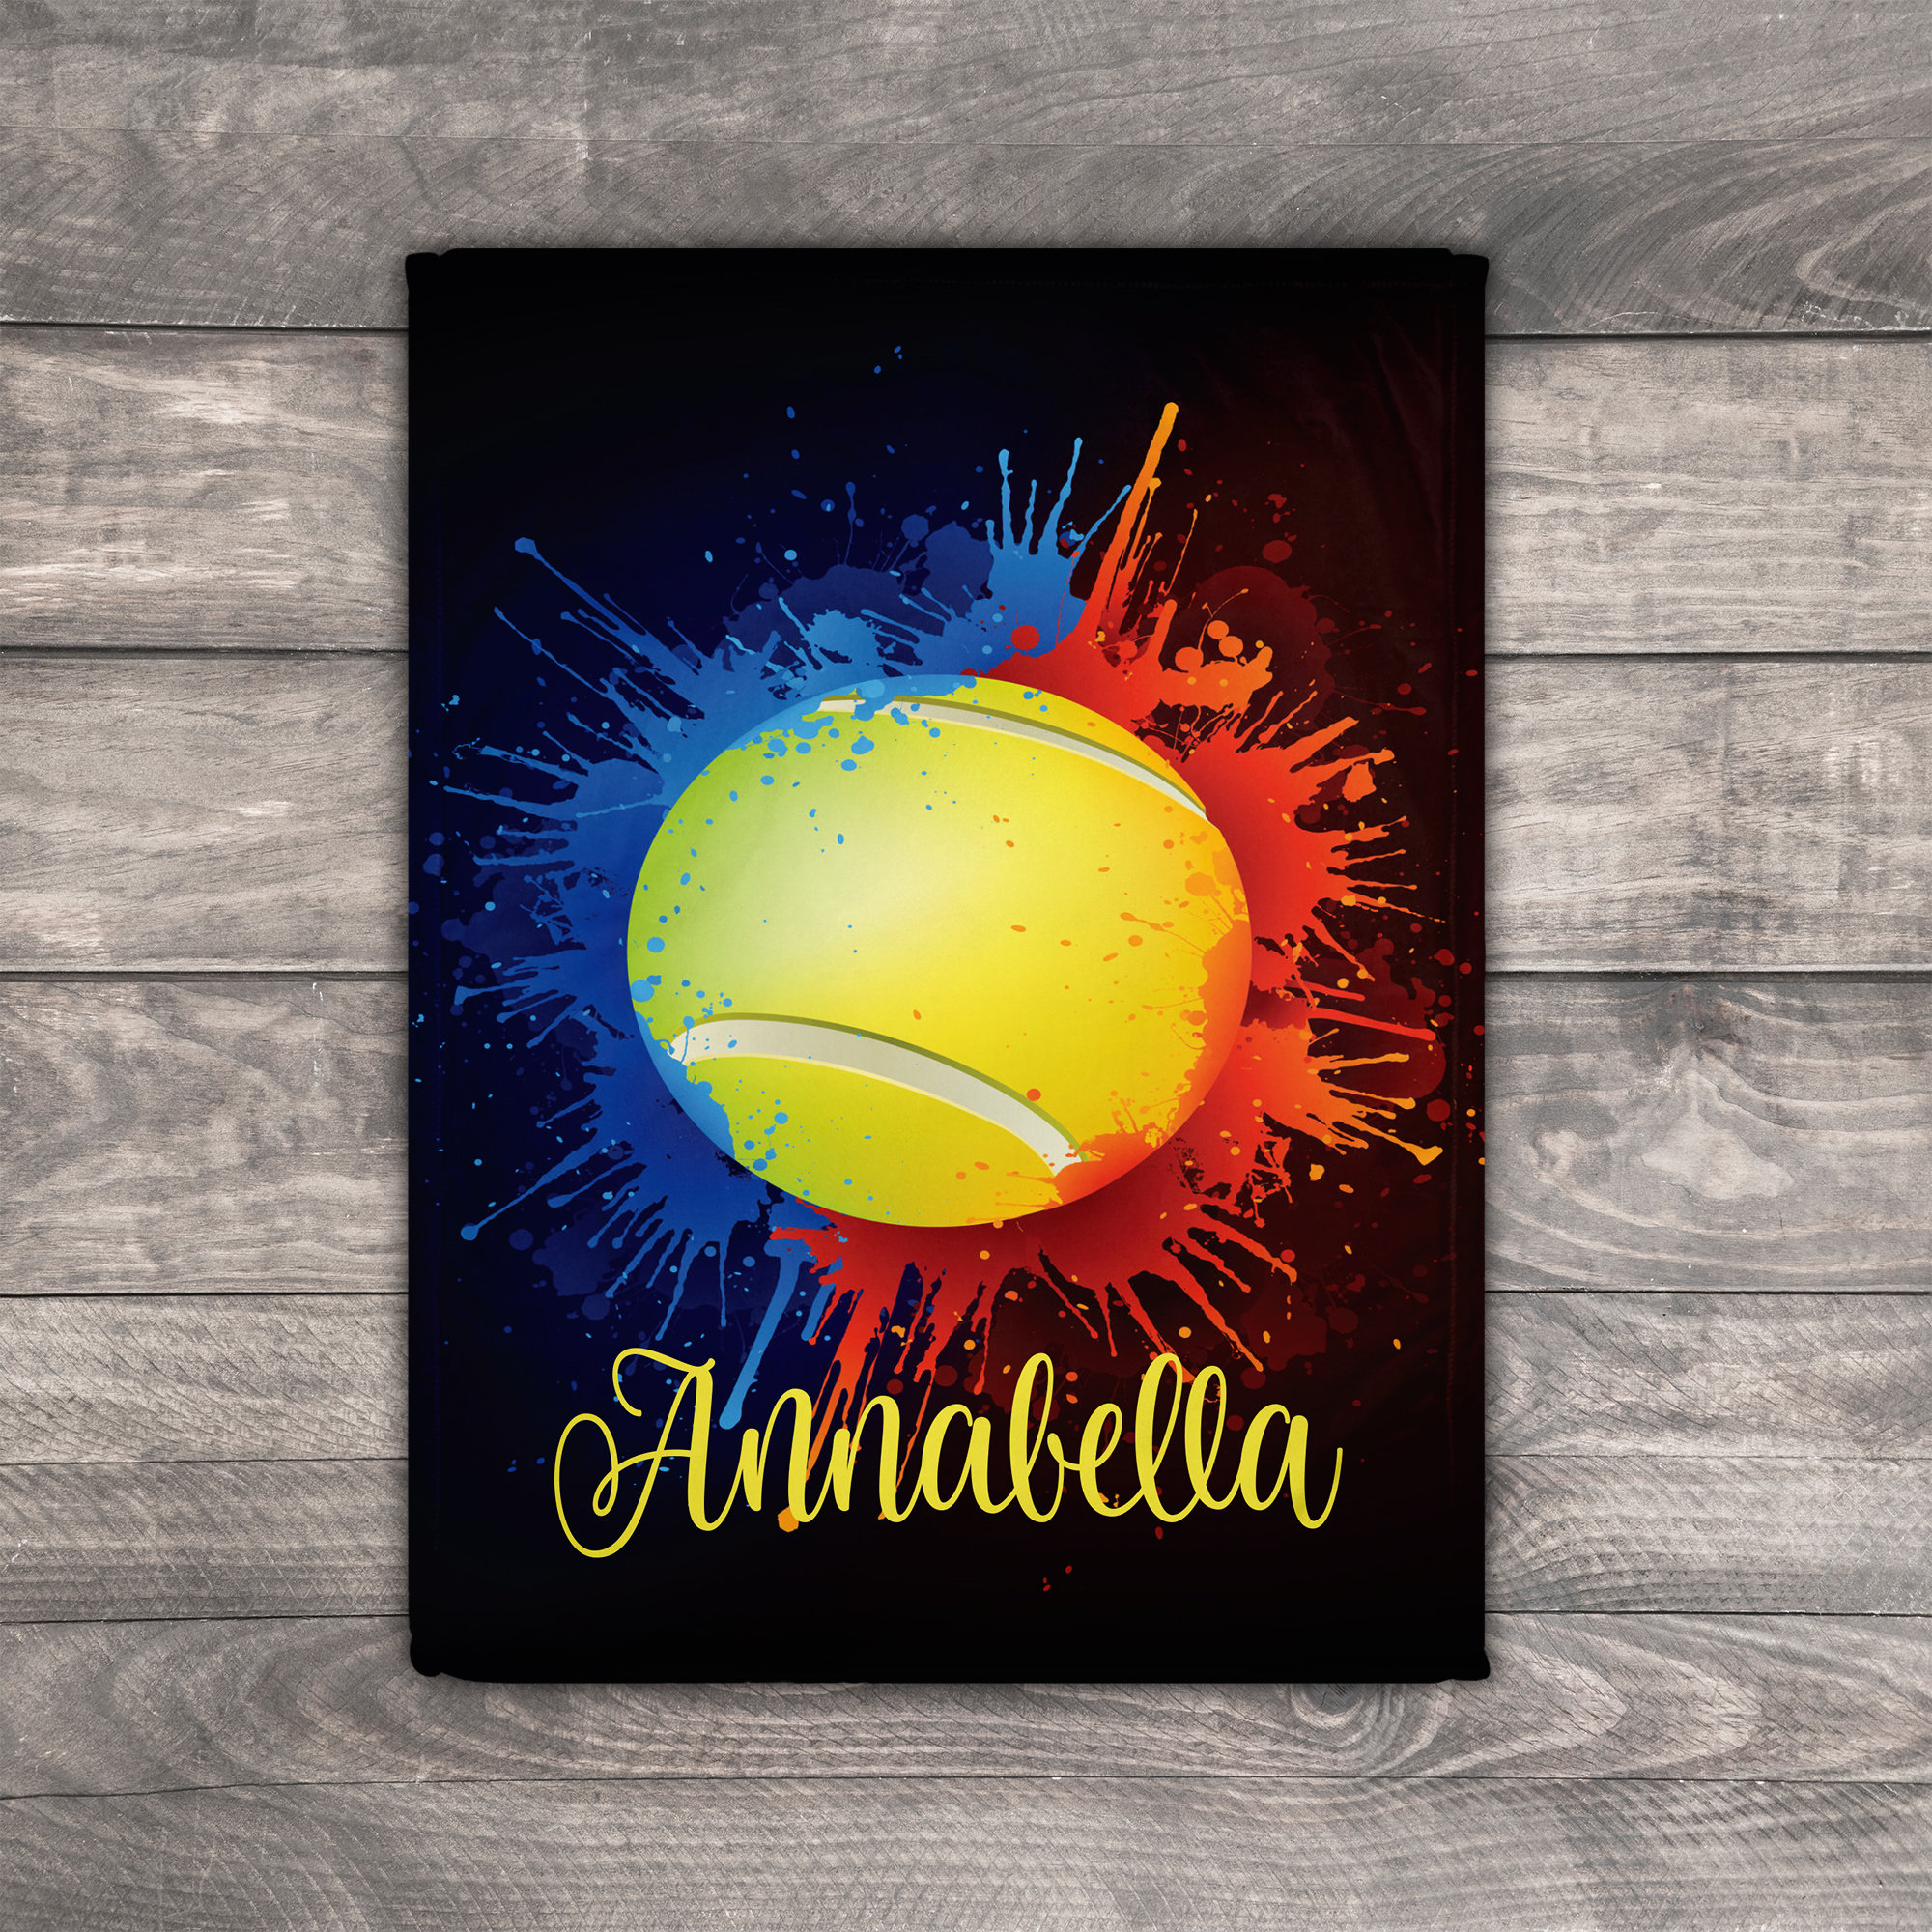 Personalized Lovely Kid Soccer Ball Blanket For Comfort & Unique|BKKid39